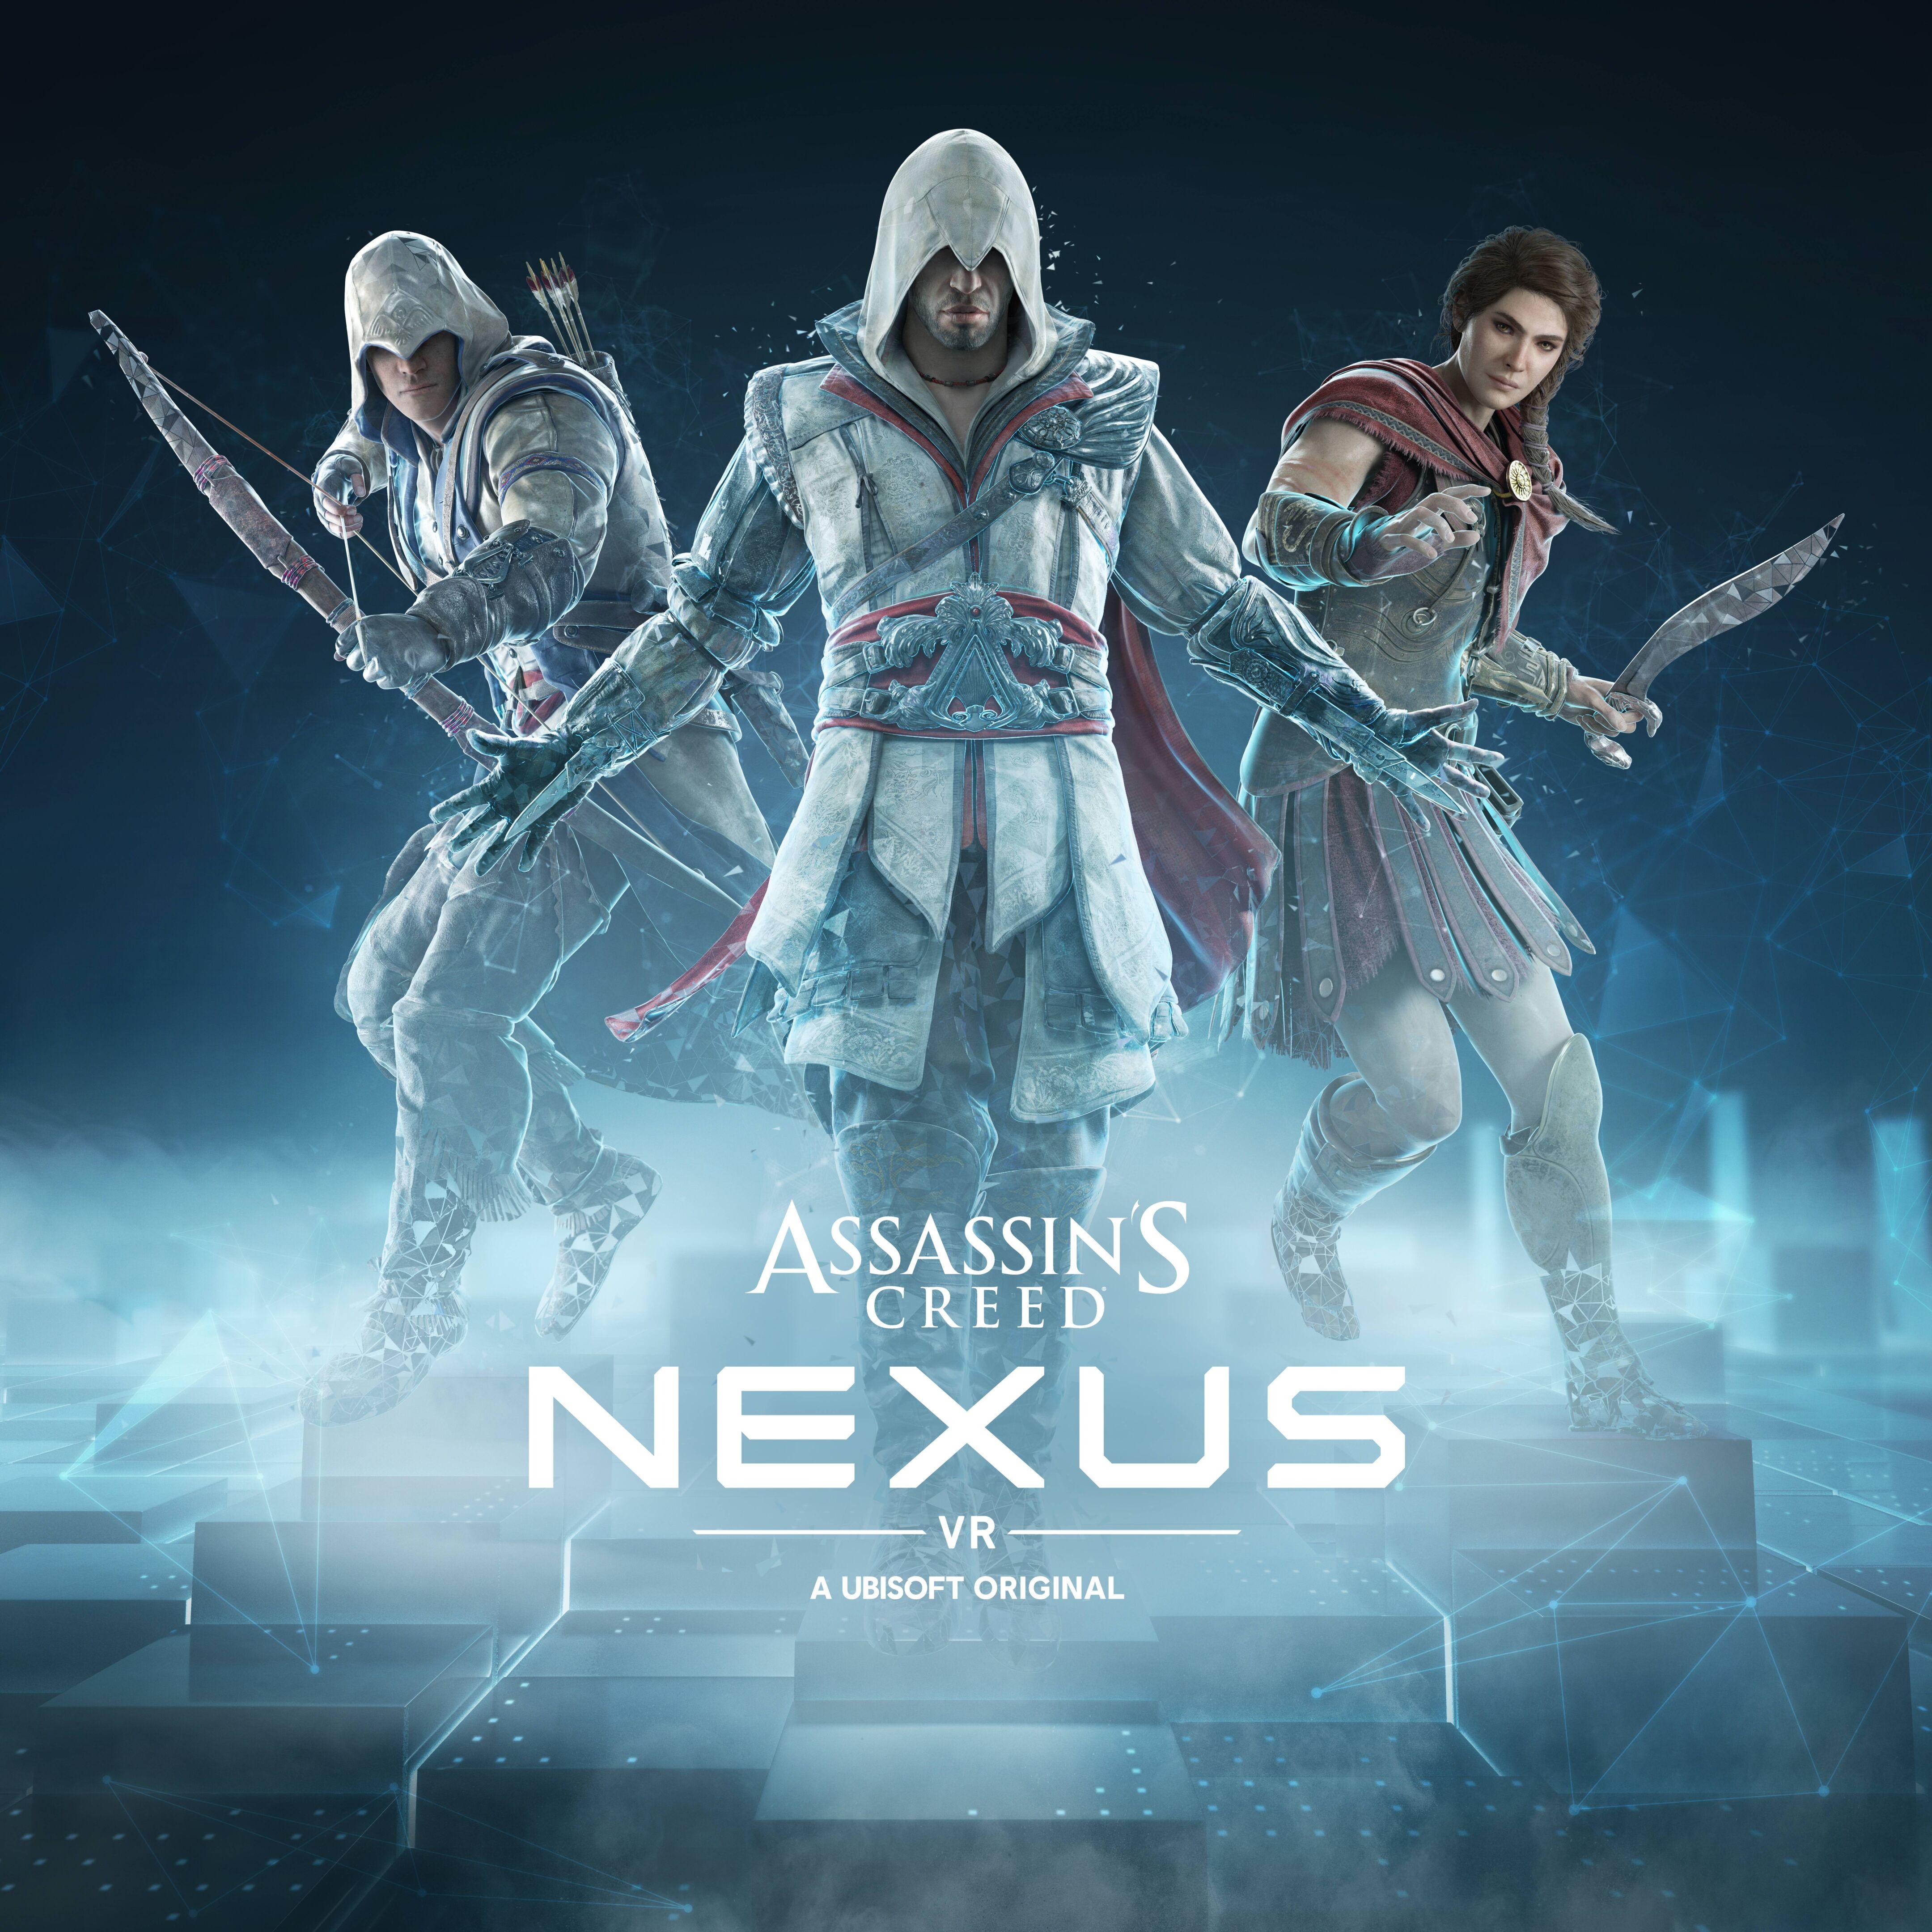 Assassin's Creed Nexus VR Launches on Meta Quest 2 & 3